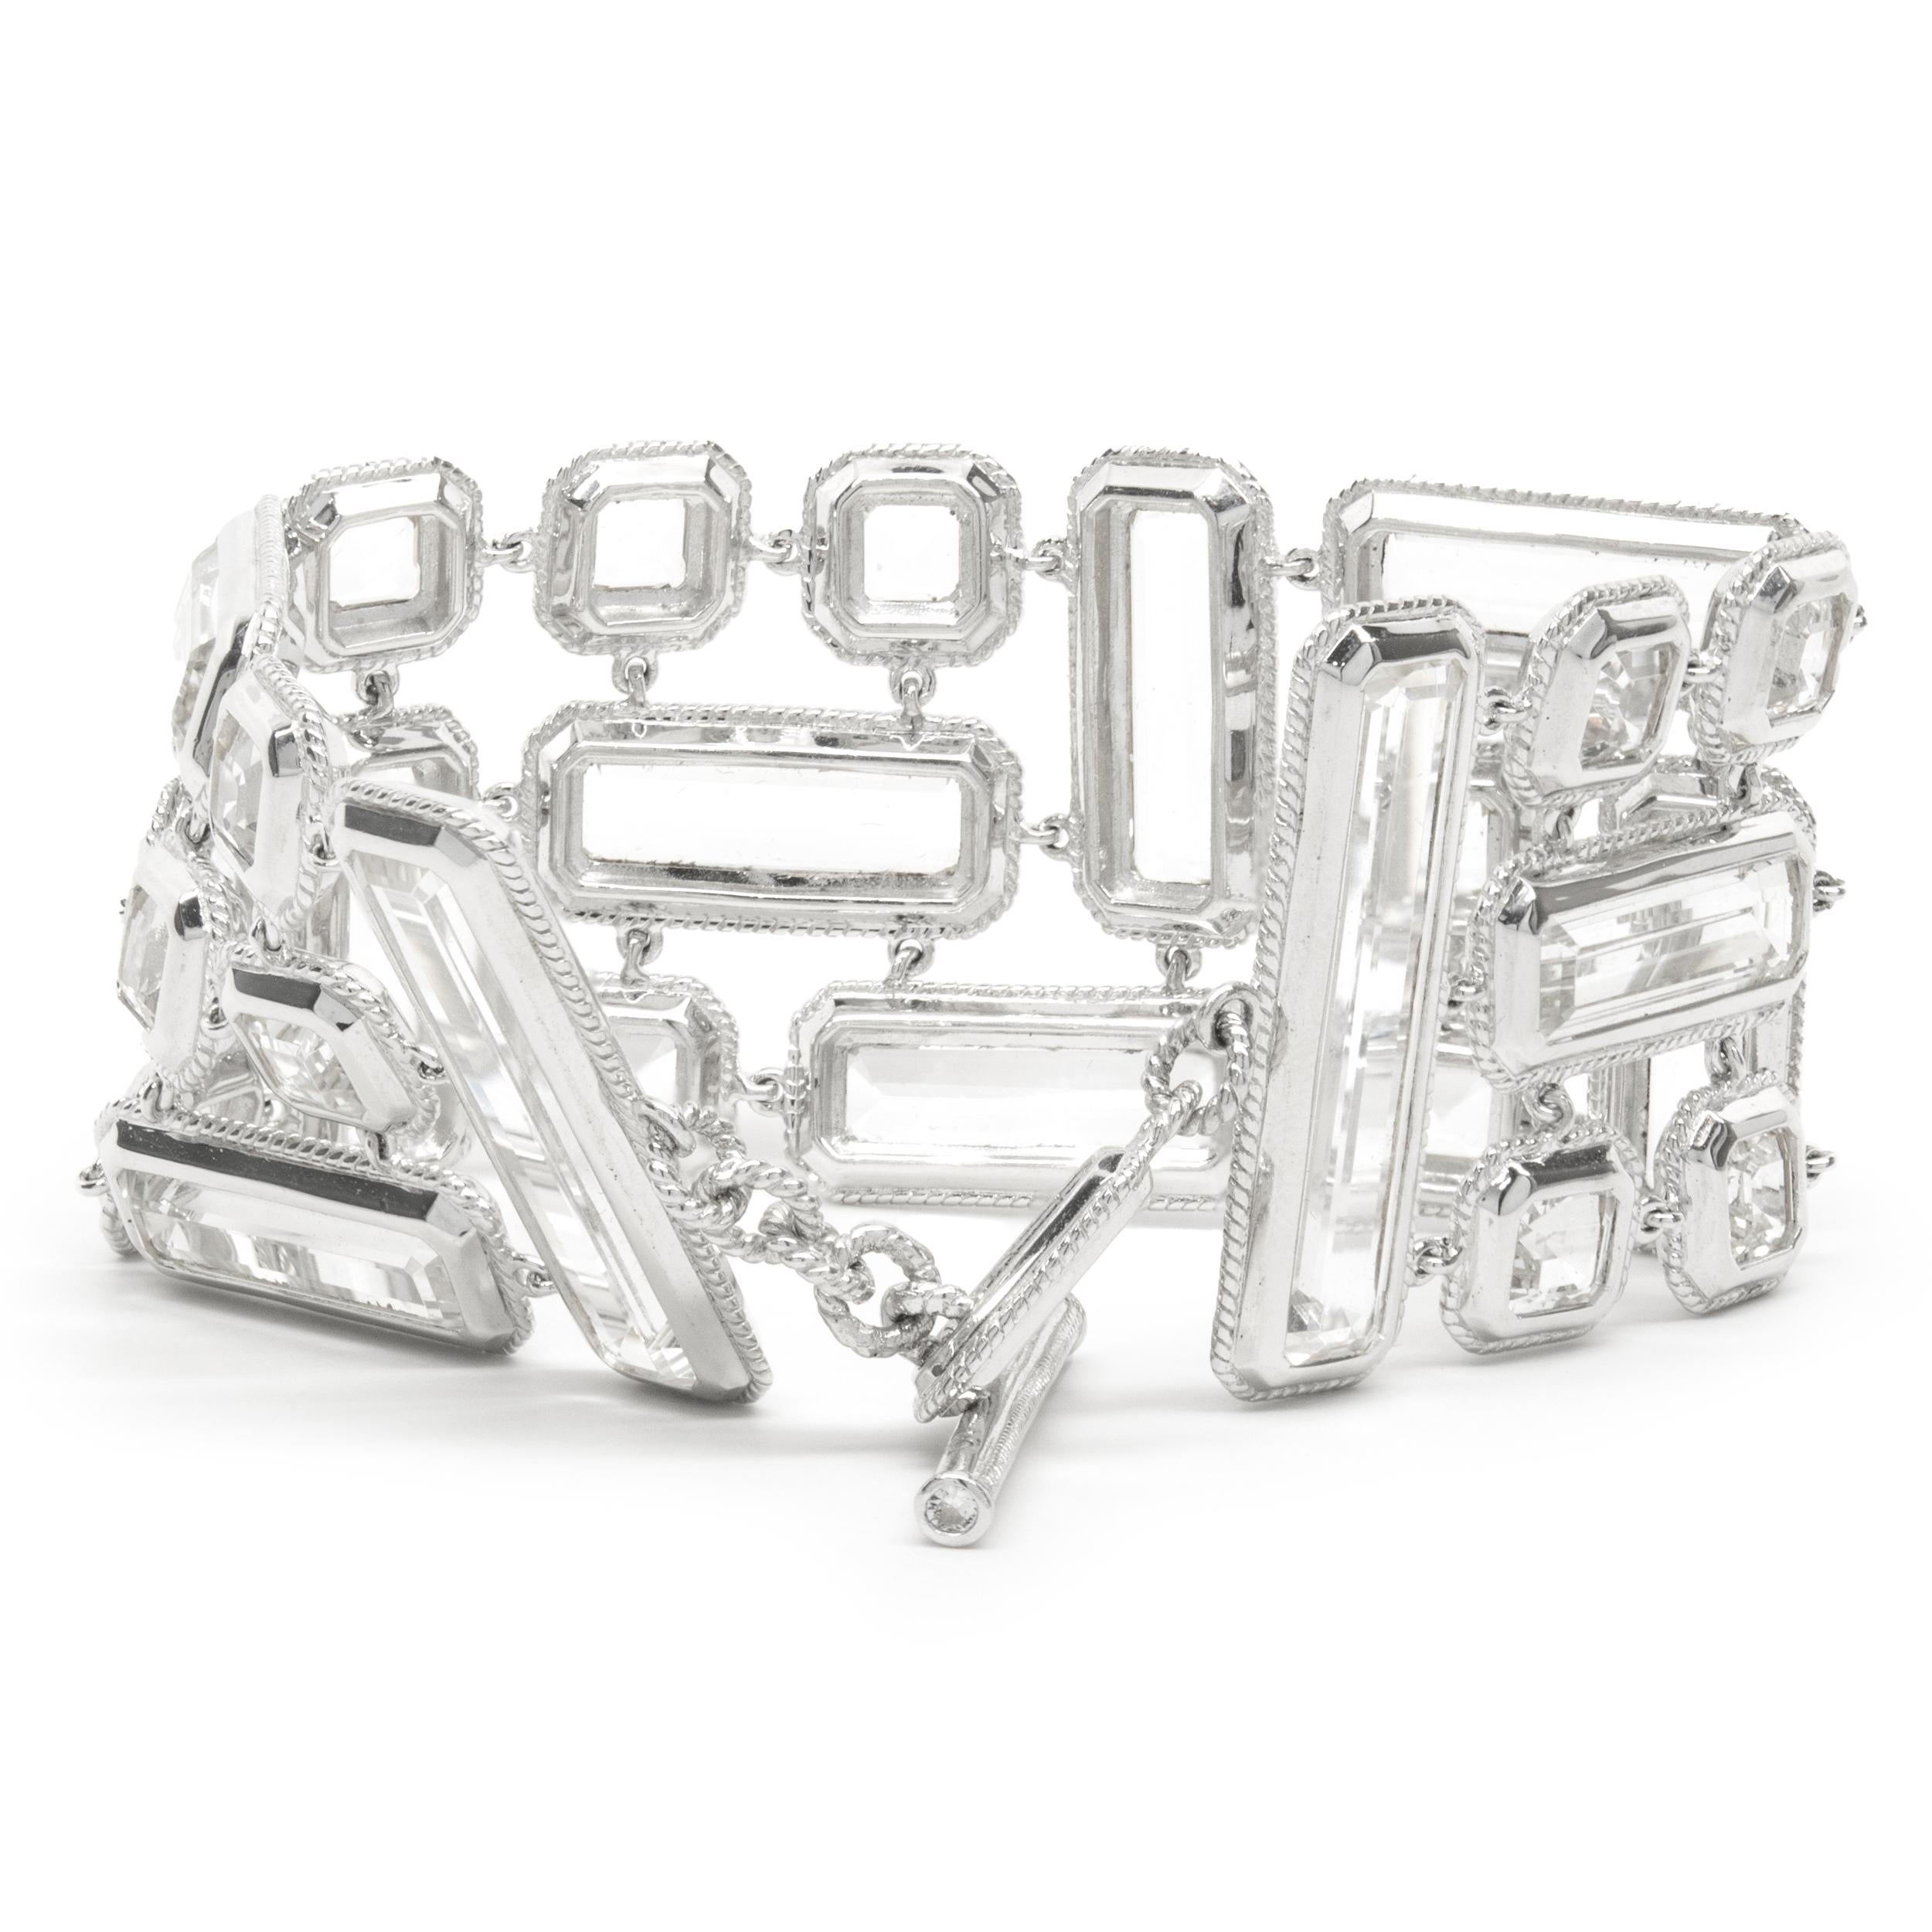 Designer: custom
Material: sterling silver
Dimensions: bracelet measures 6.5-inches in length
Weight: 55.17 grams
